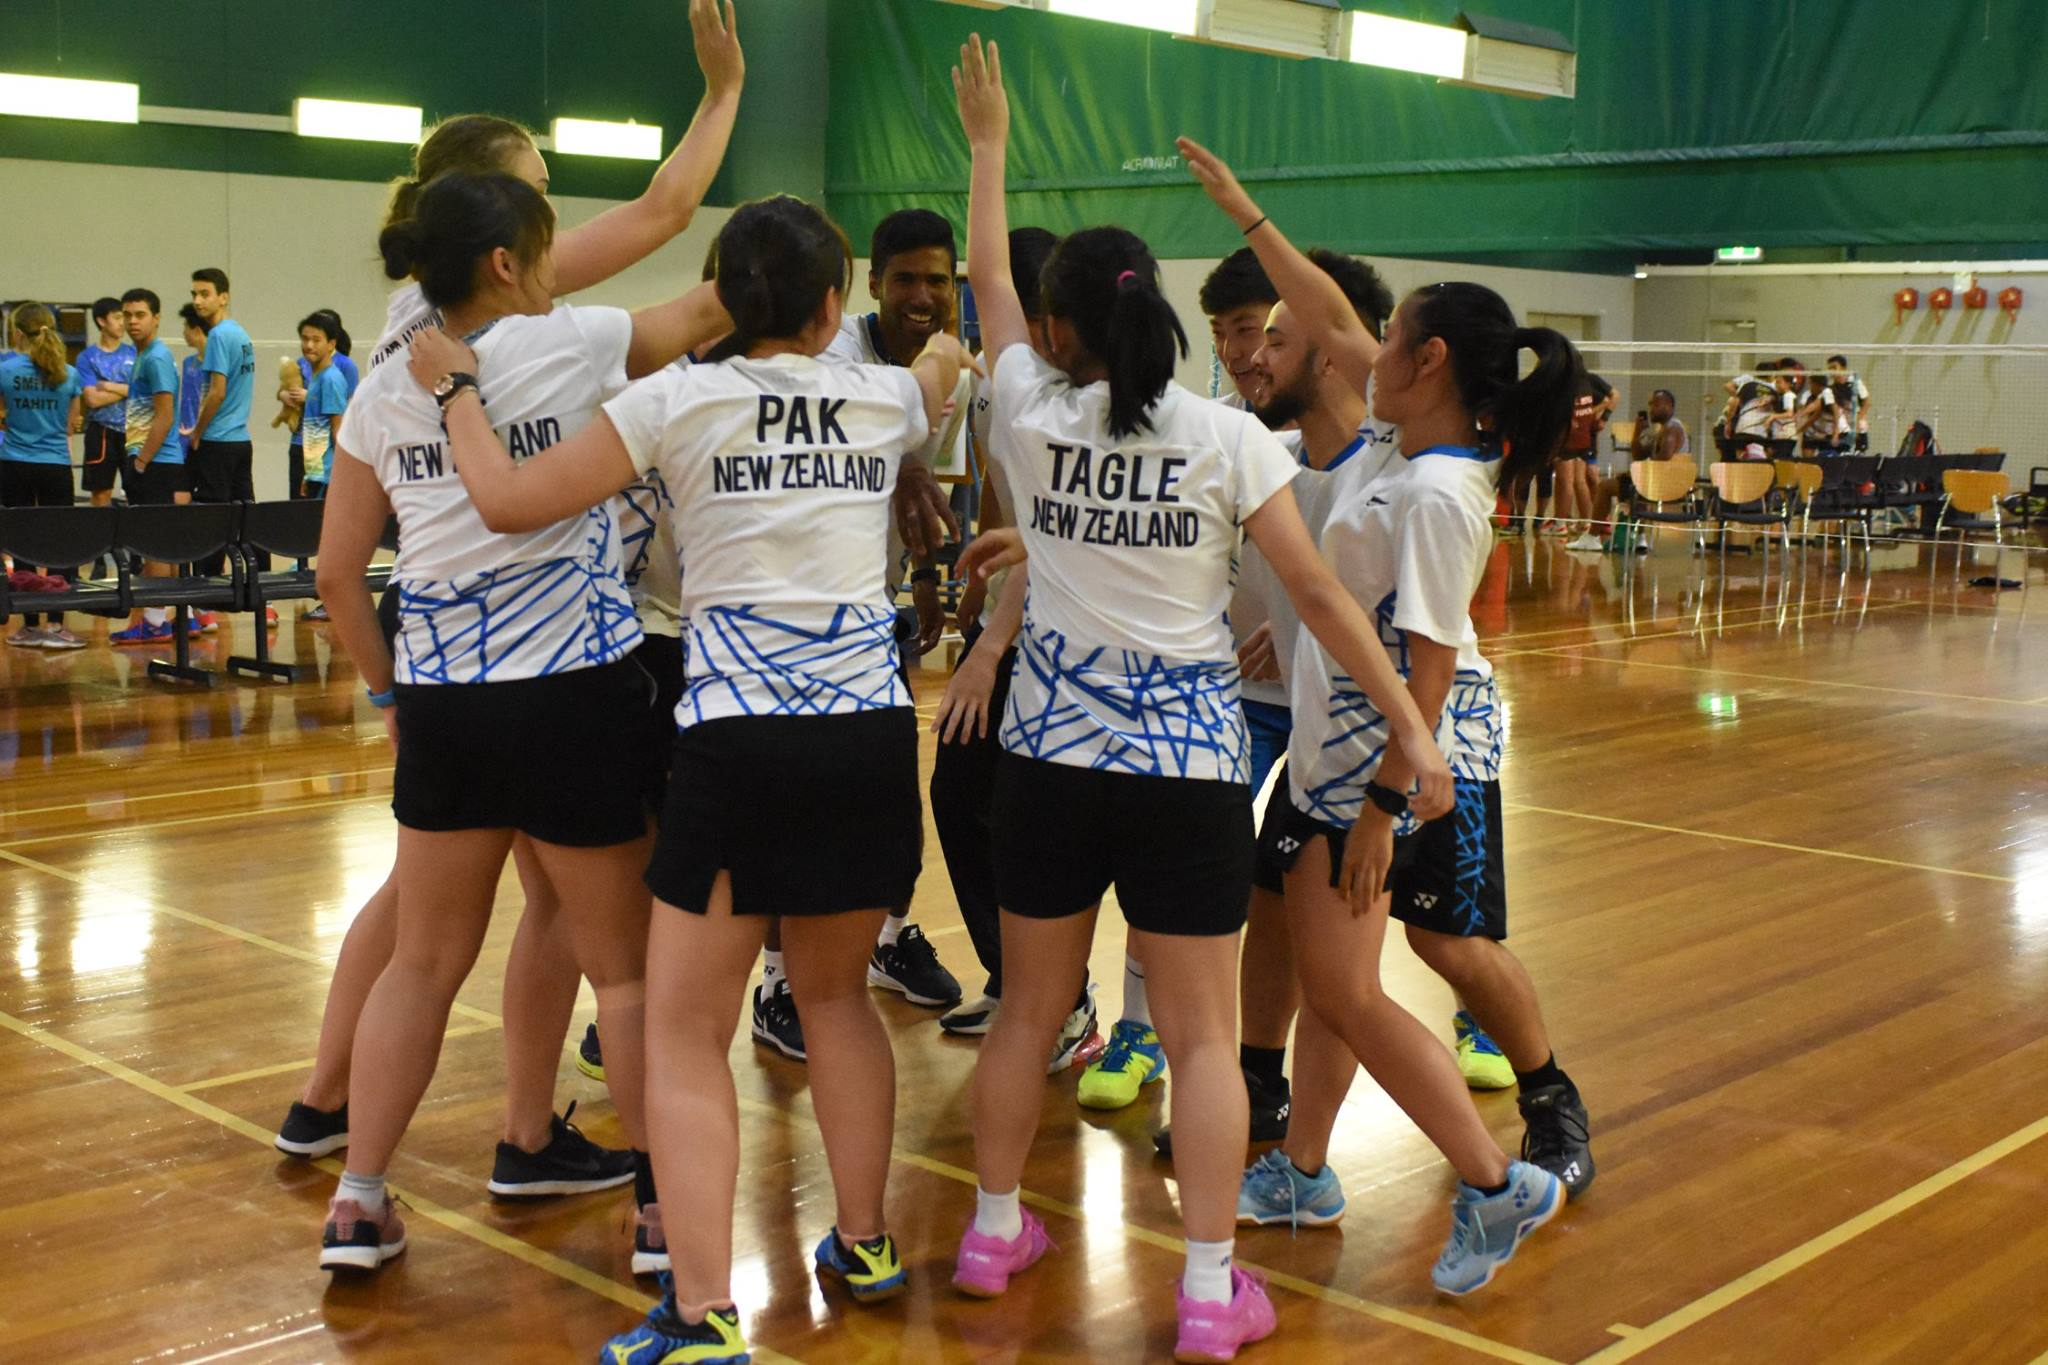 New Zealand and Australia have continued their winning starts to the Oceania Mixed Team Badminton Championships in Melbourne ©Oceania Badminton